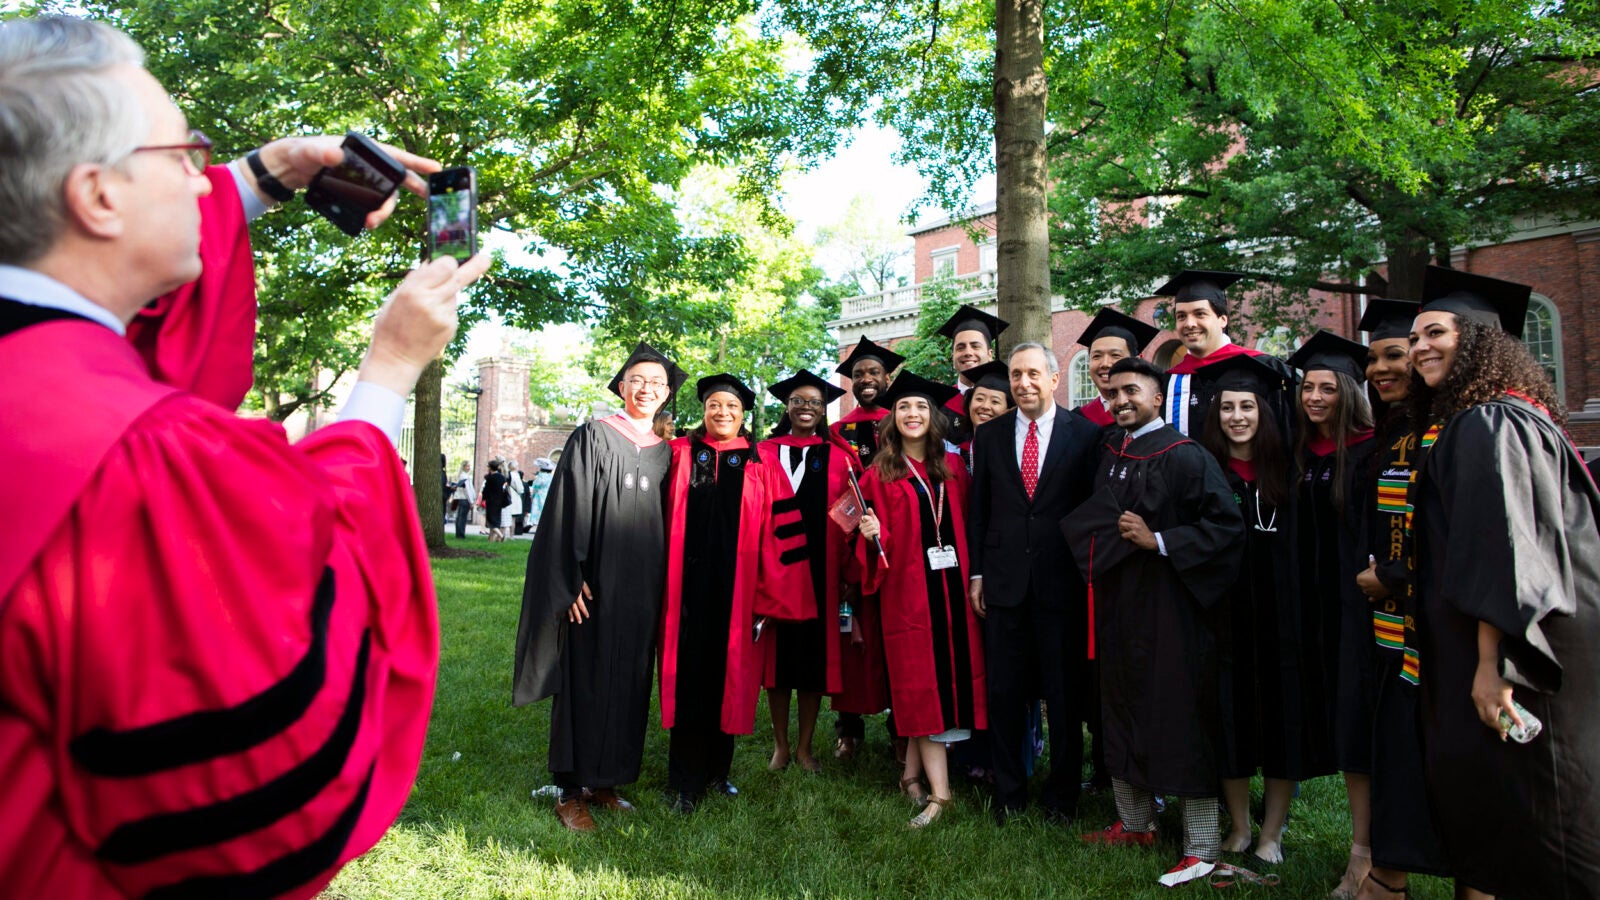 Dental School Dean William Giannobile photographed Bacow with students during Commencement for the Classes of 2020 and 2021.